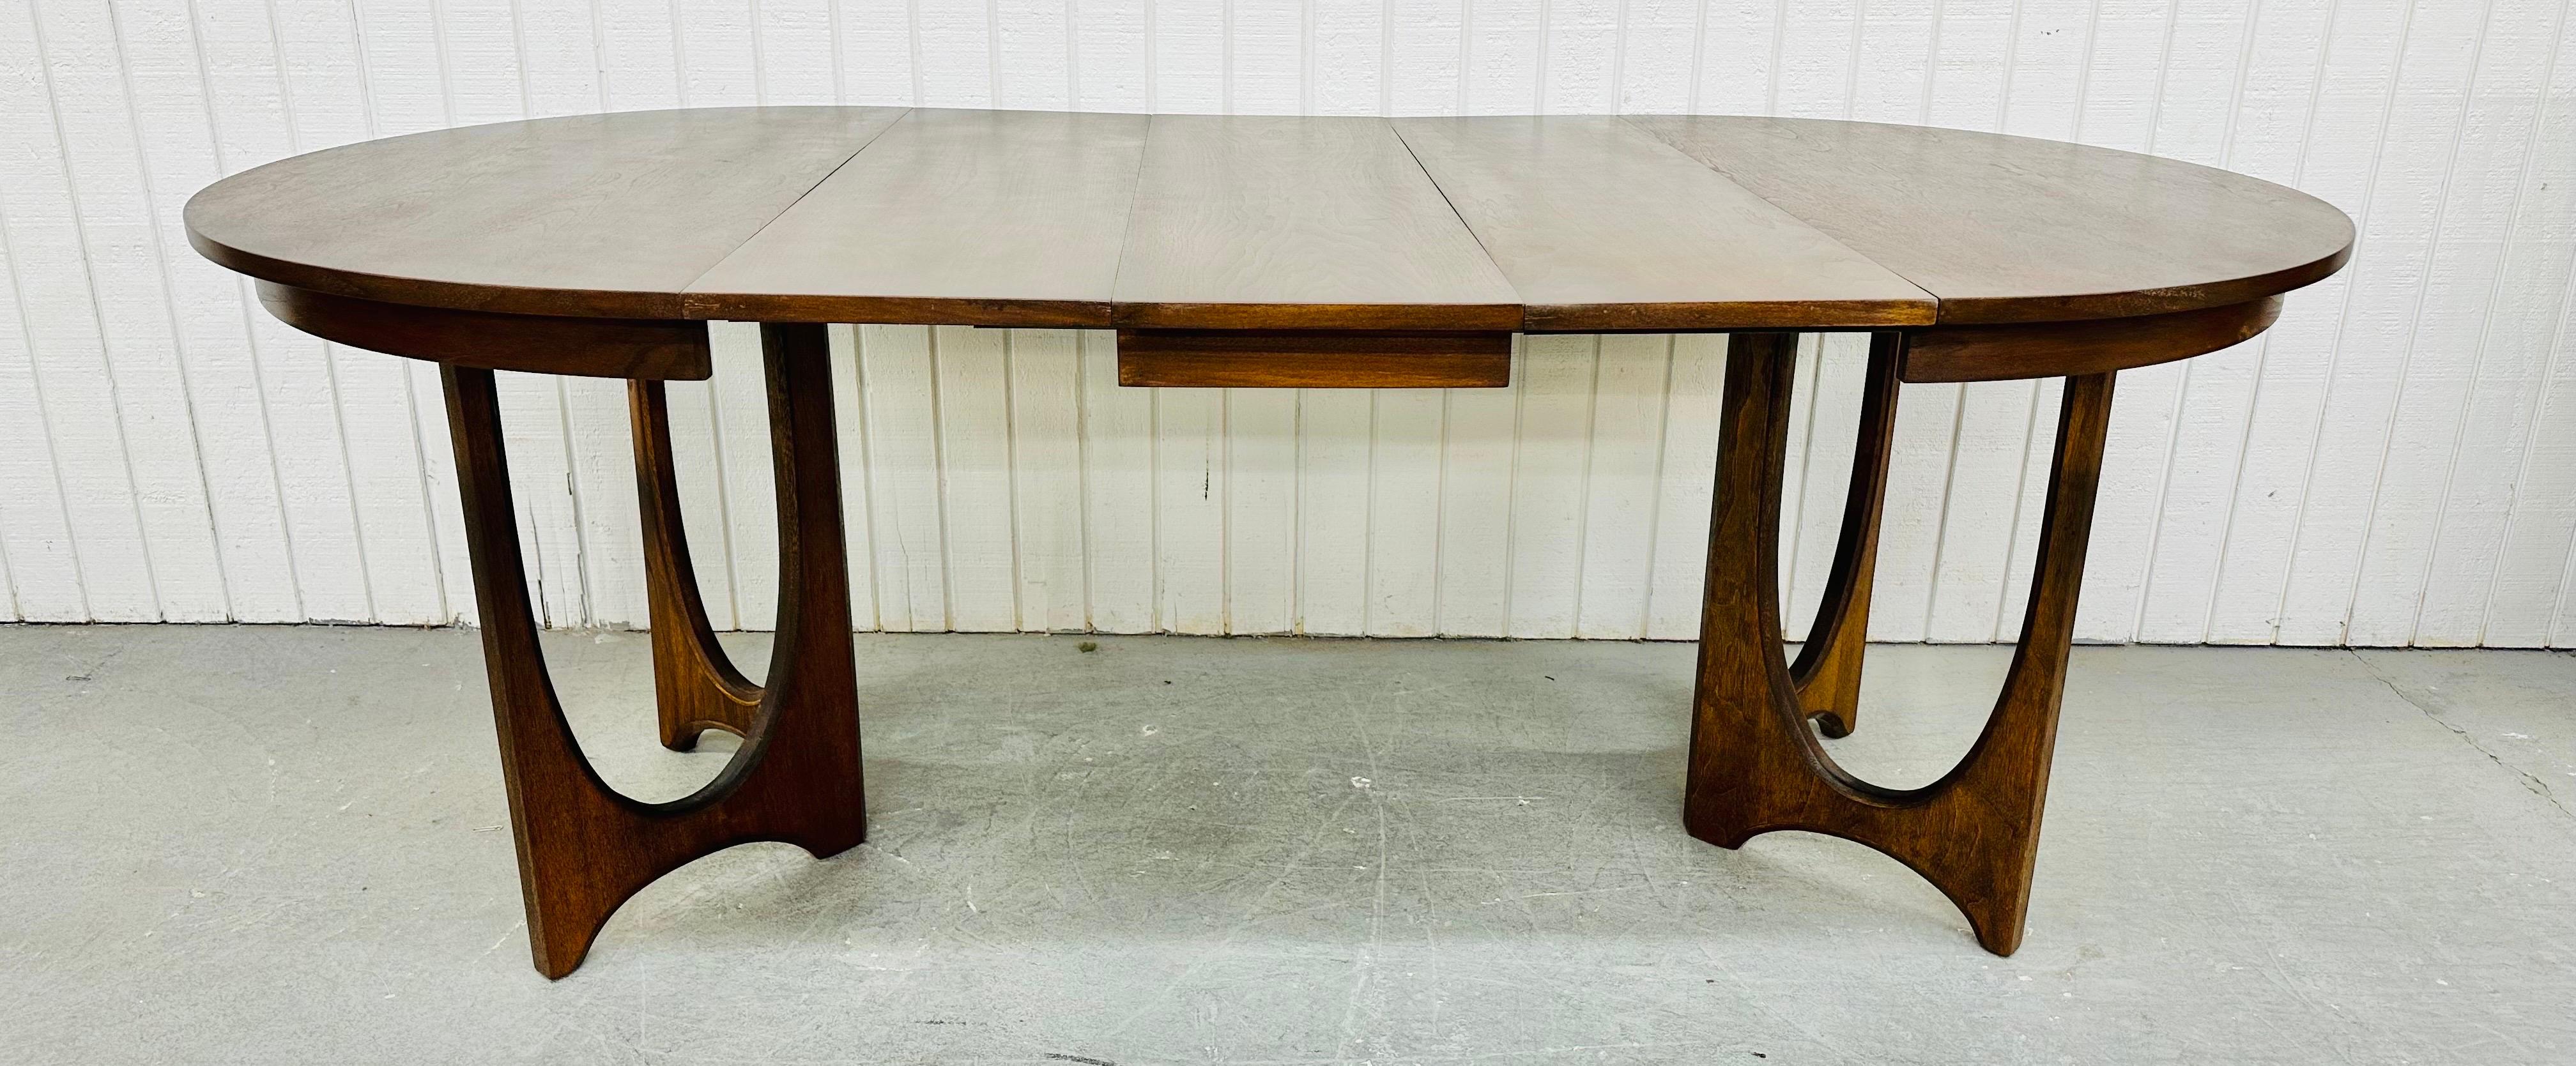 This listing is for a Mid-Century Modern Broyhill Brasilia Walnut Dining Table. Featuring a round 44” top that expands up to 80” L with three leaves, sculpted Brasilia pedestal legs, and a beautiful walnut finish. This is an exceptional combination